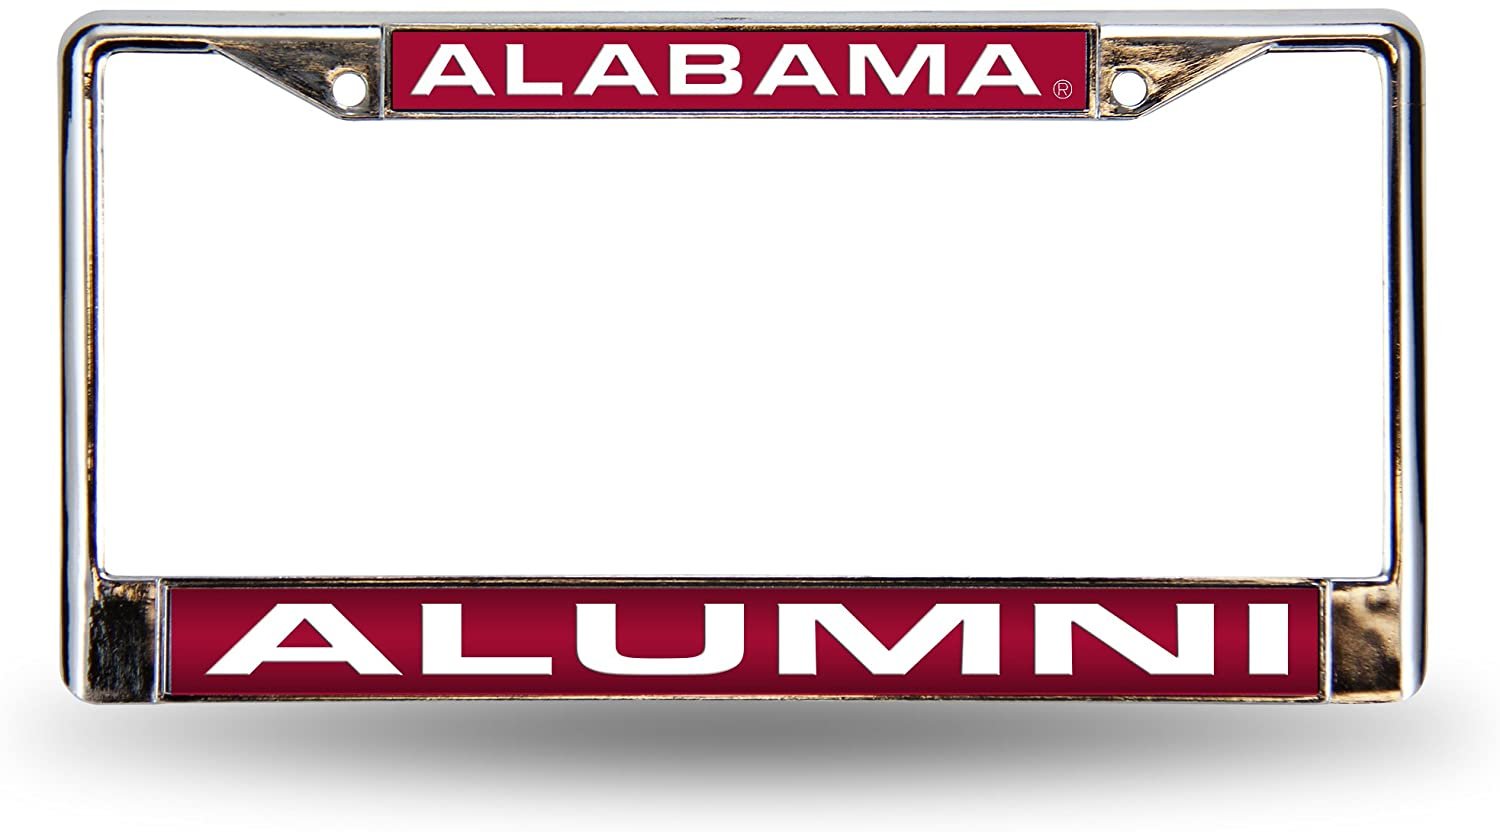 University of Alabama Crimson Tide Alumni Metal License Plate Frame Chrome Tag Cover, Laser Acrylic Mirrored Inserts, 12x6 Inch